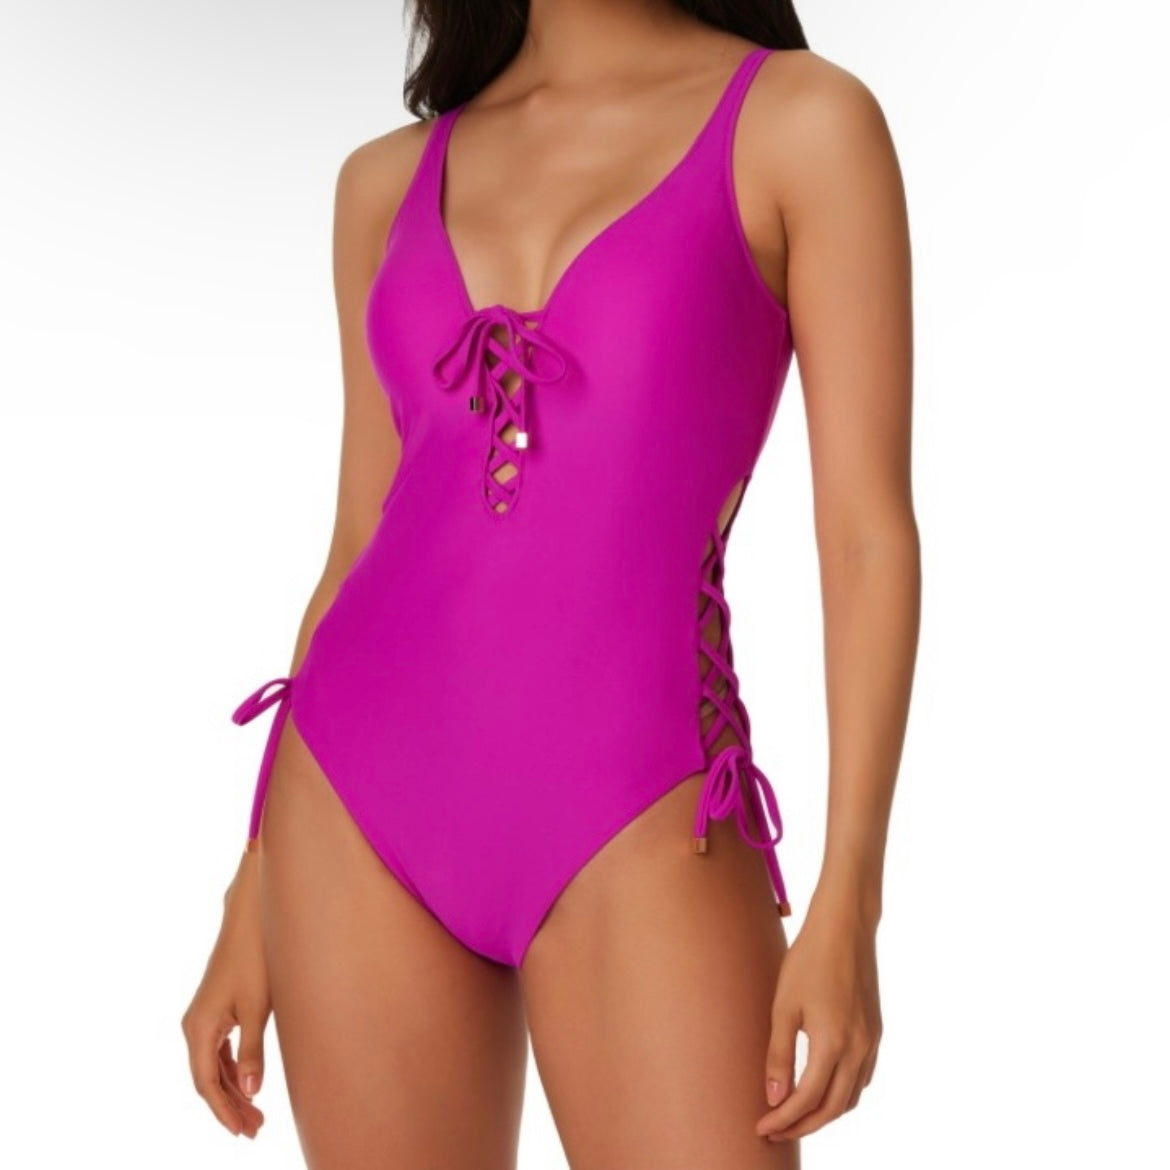 Orchid Pink Summer Solids Lace-Up One-Piece Swimsuit Women's Swimwear